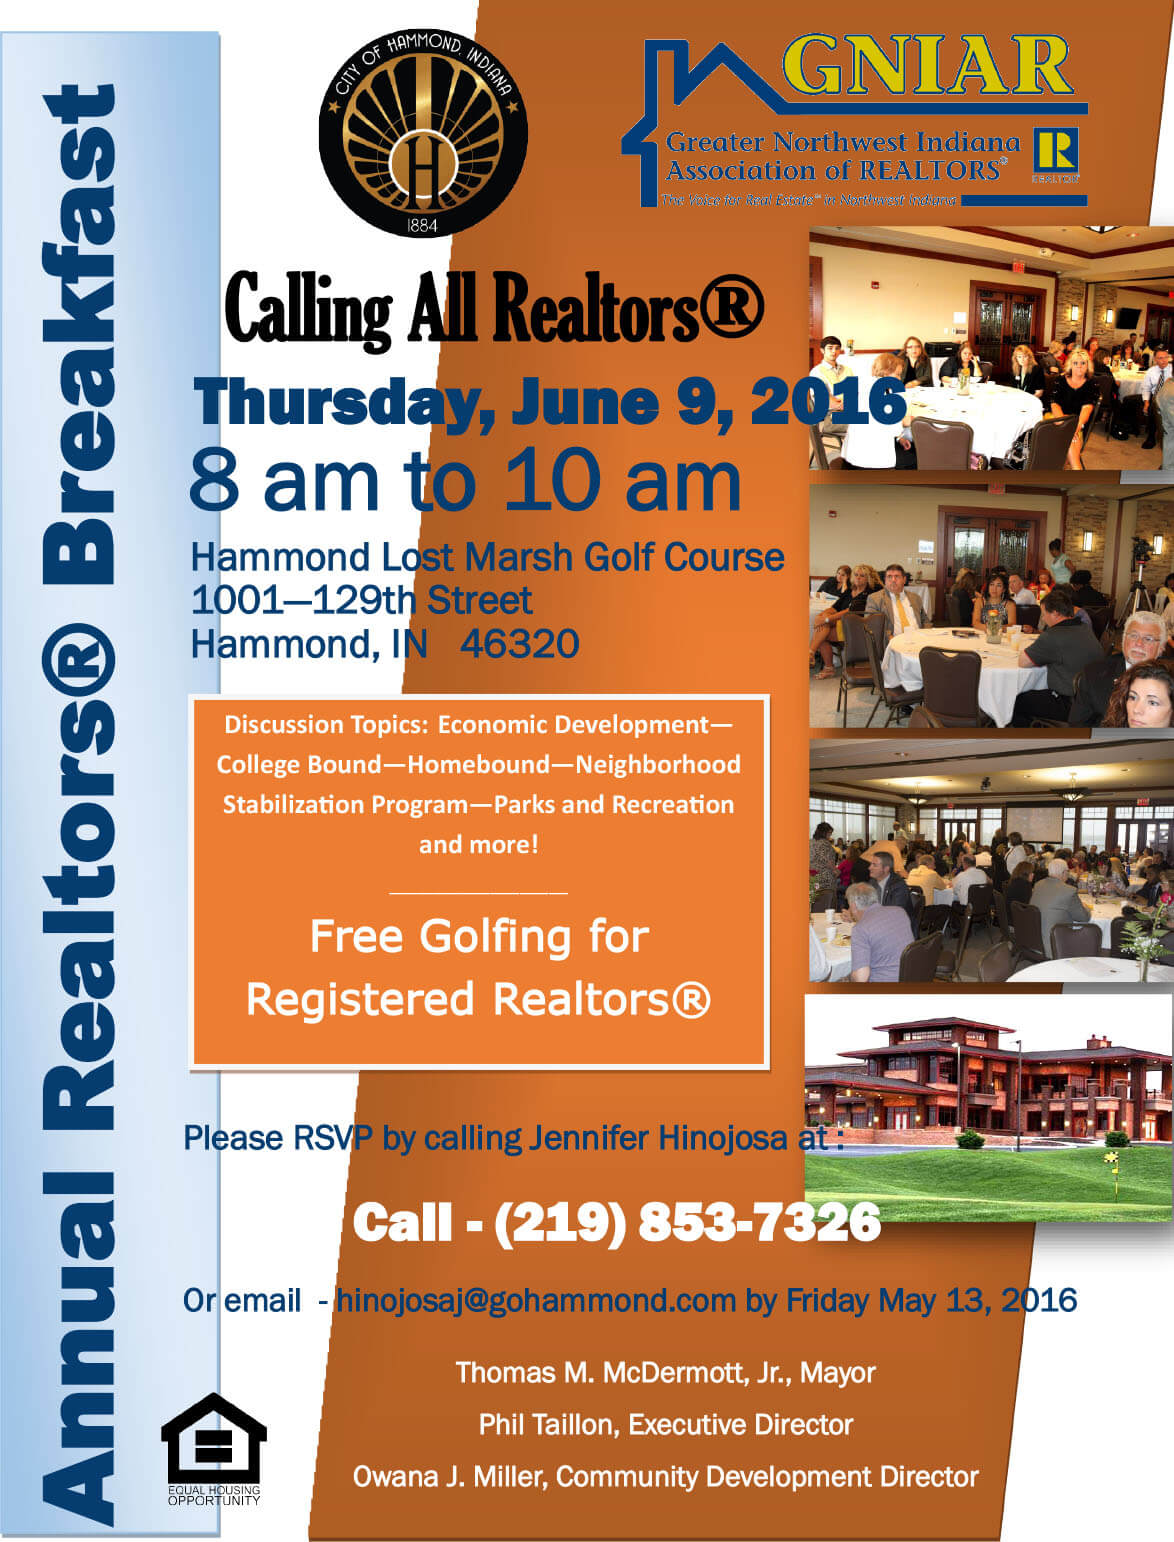 and the City of Hammond invite all Realtors to join us for the Annual Realtors Breakfast